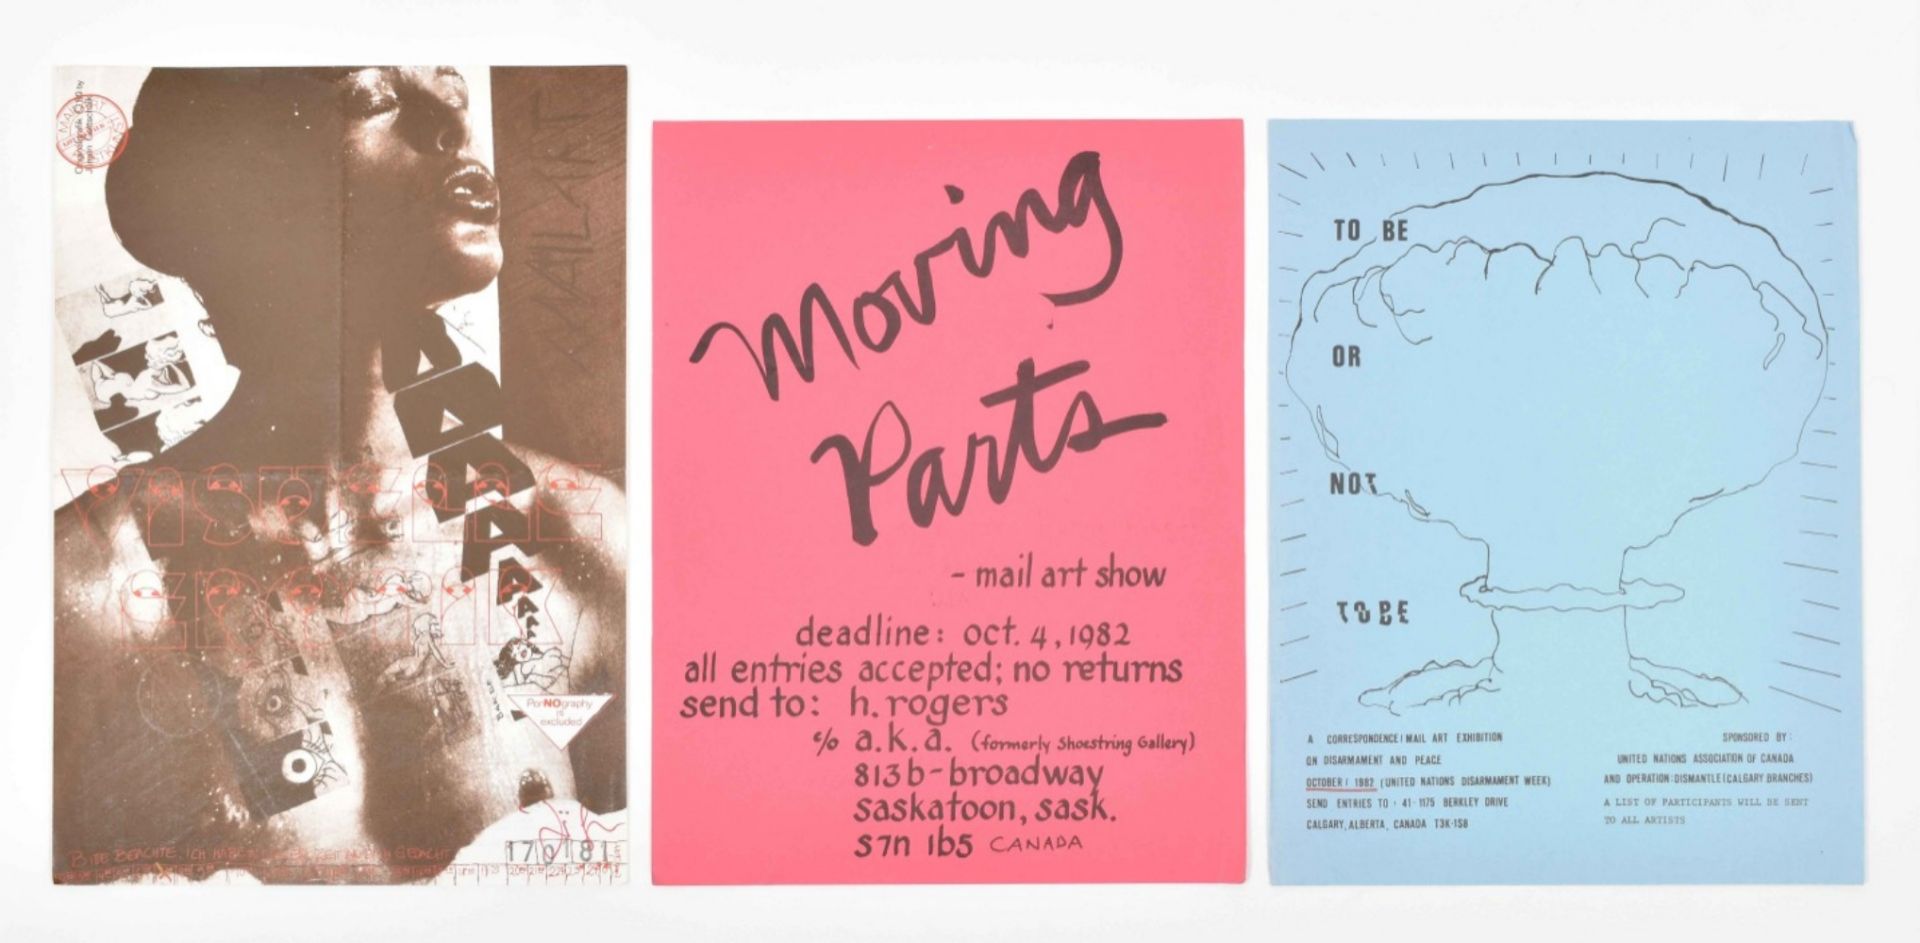 Mail art exhibition flyers - Image 7 of 9